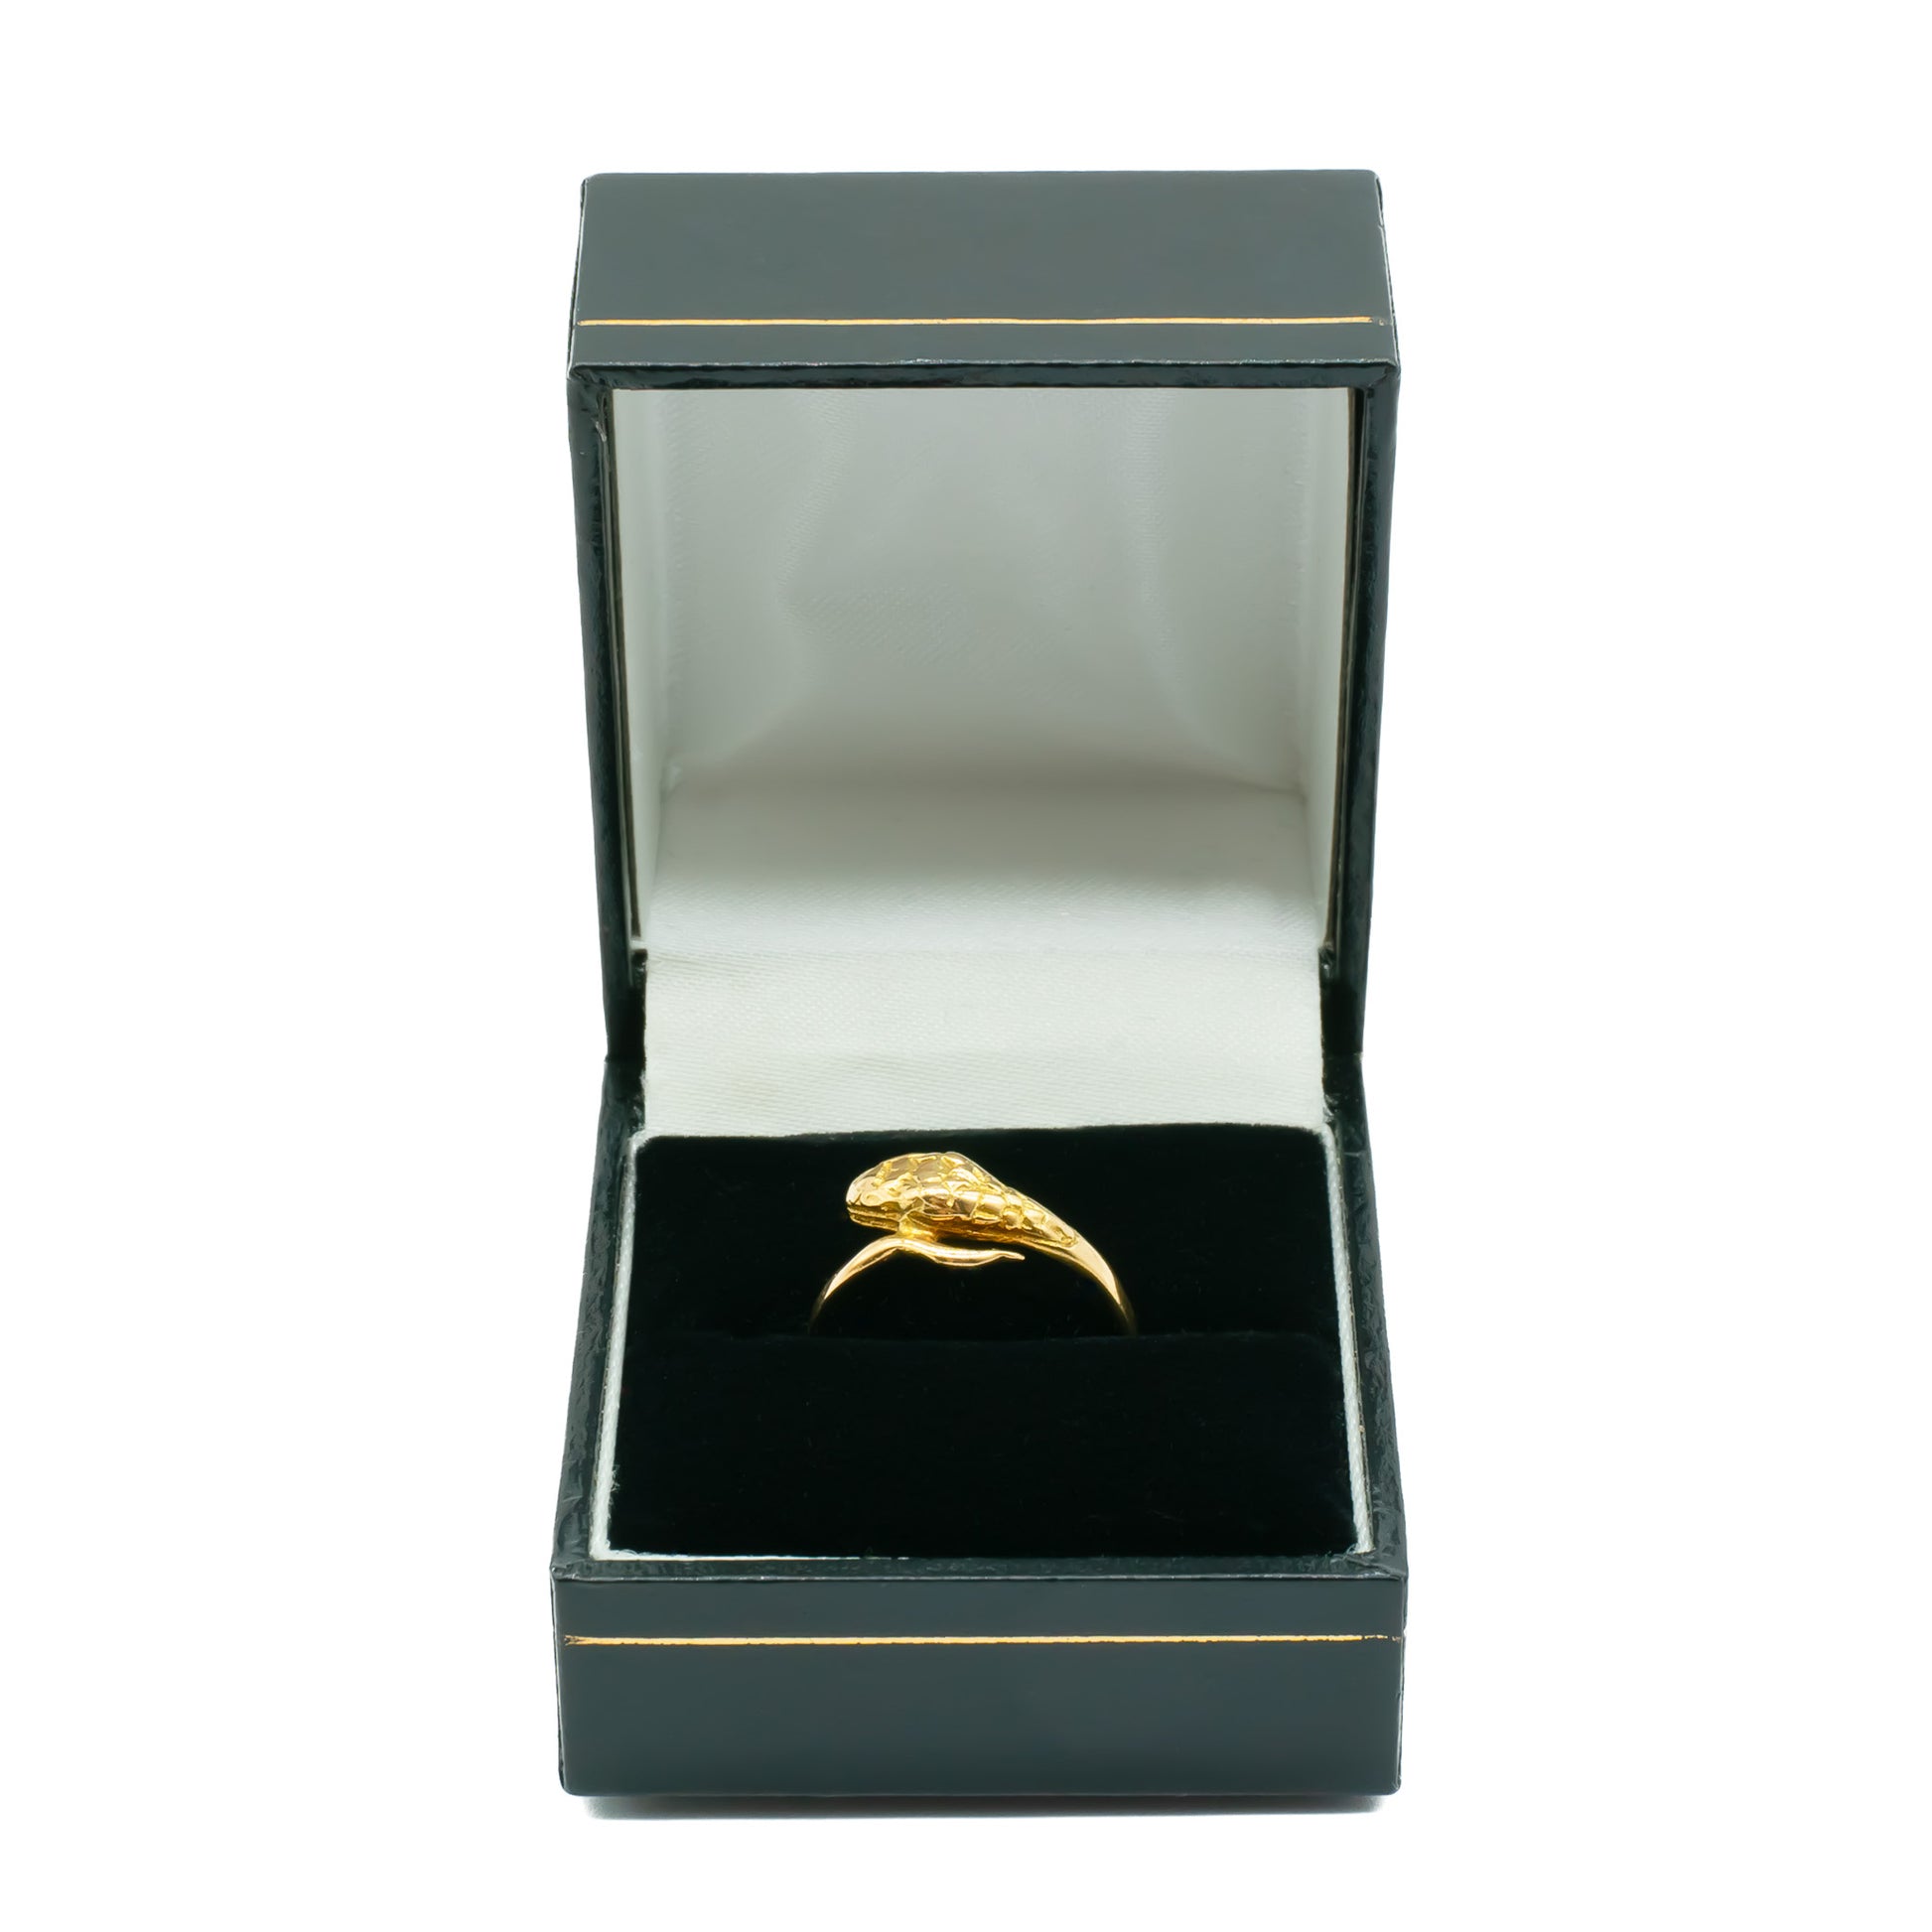 Lovely vintage 18ct yellow gold serpent ring with a textured head. Italy